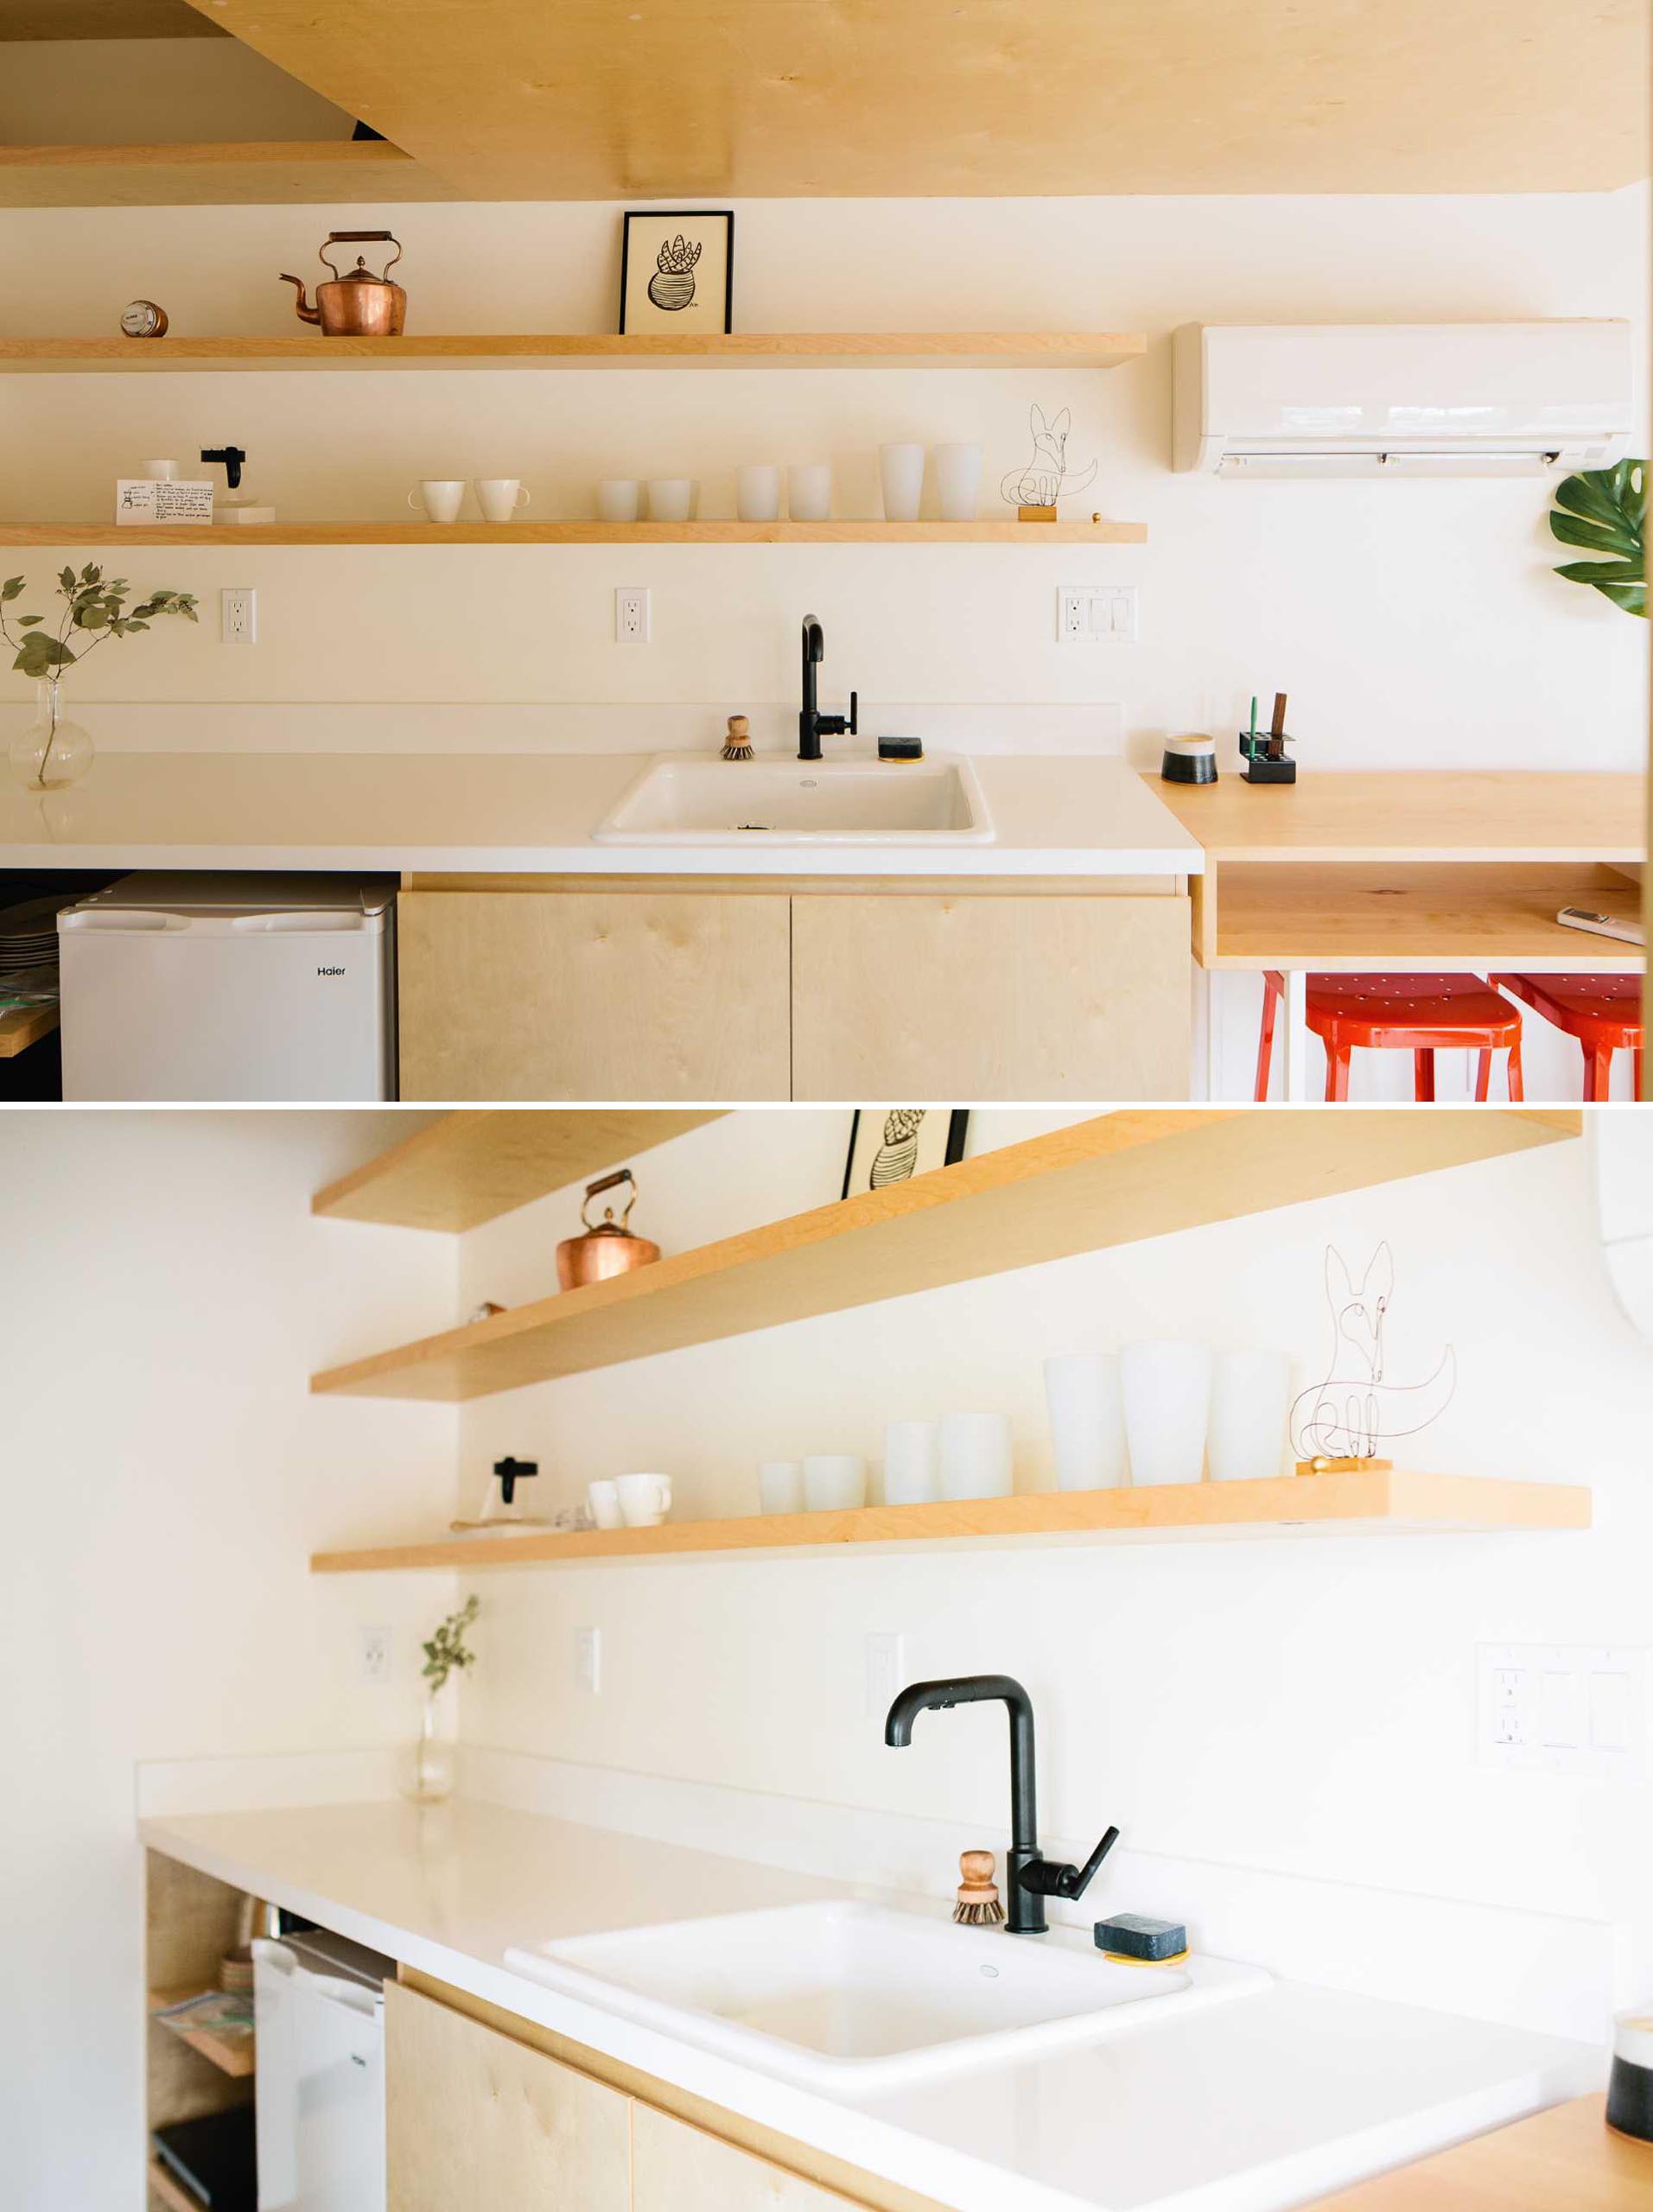 In this small kitchen, floating wood shelves have been added for storage, while a white countertop helps to keep the space bright.